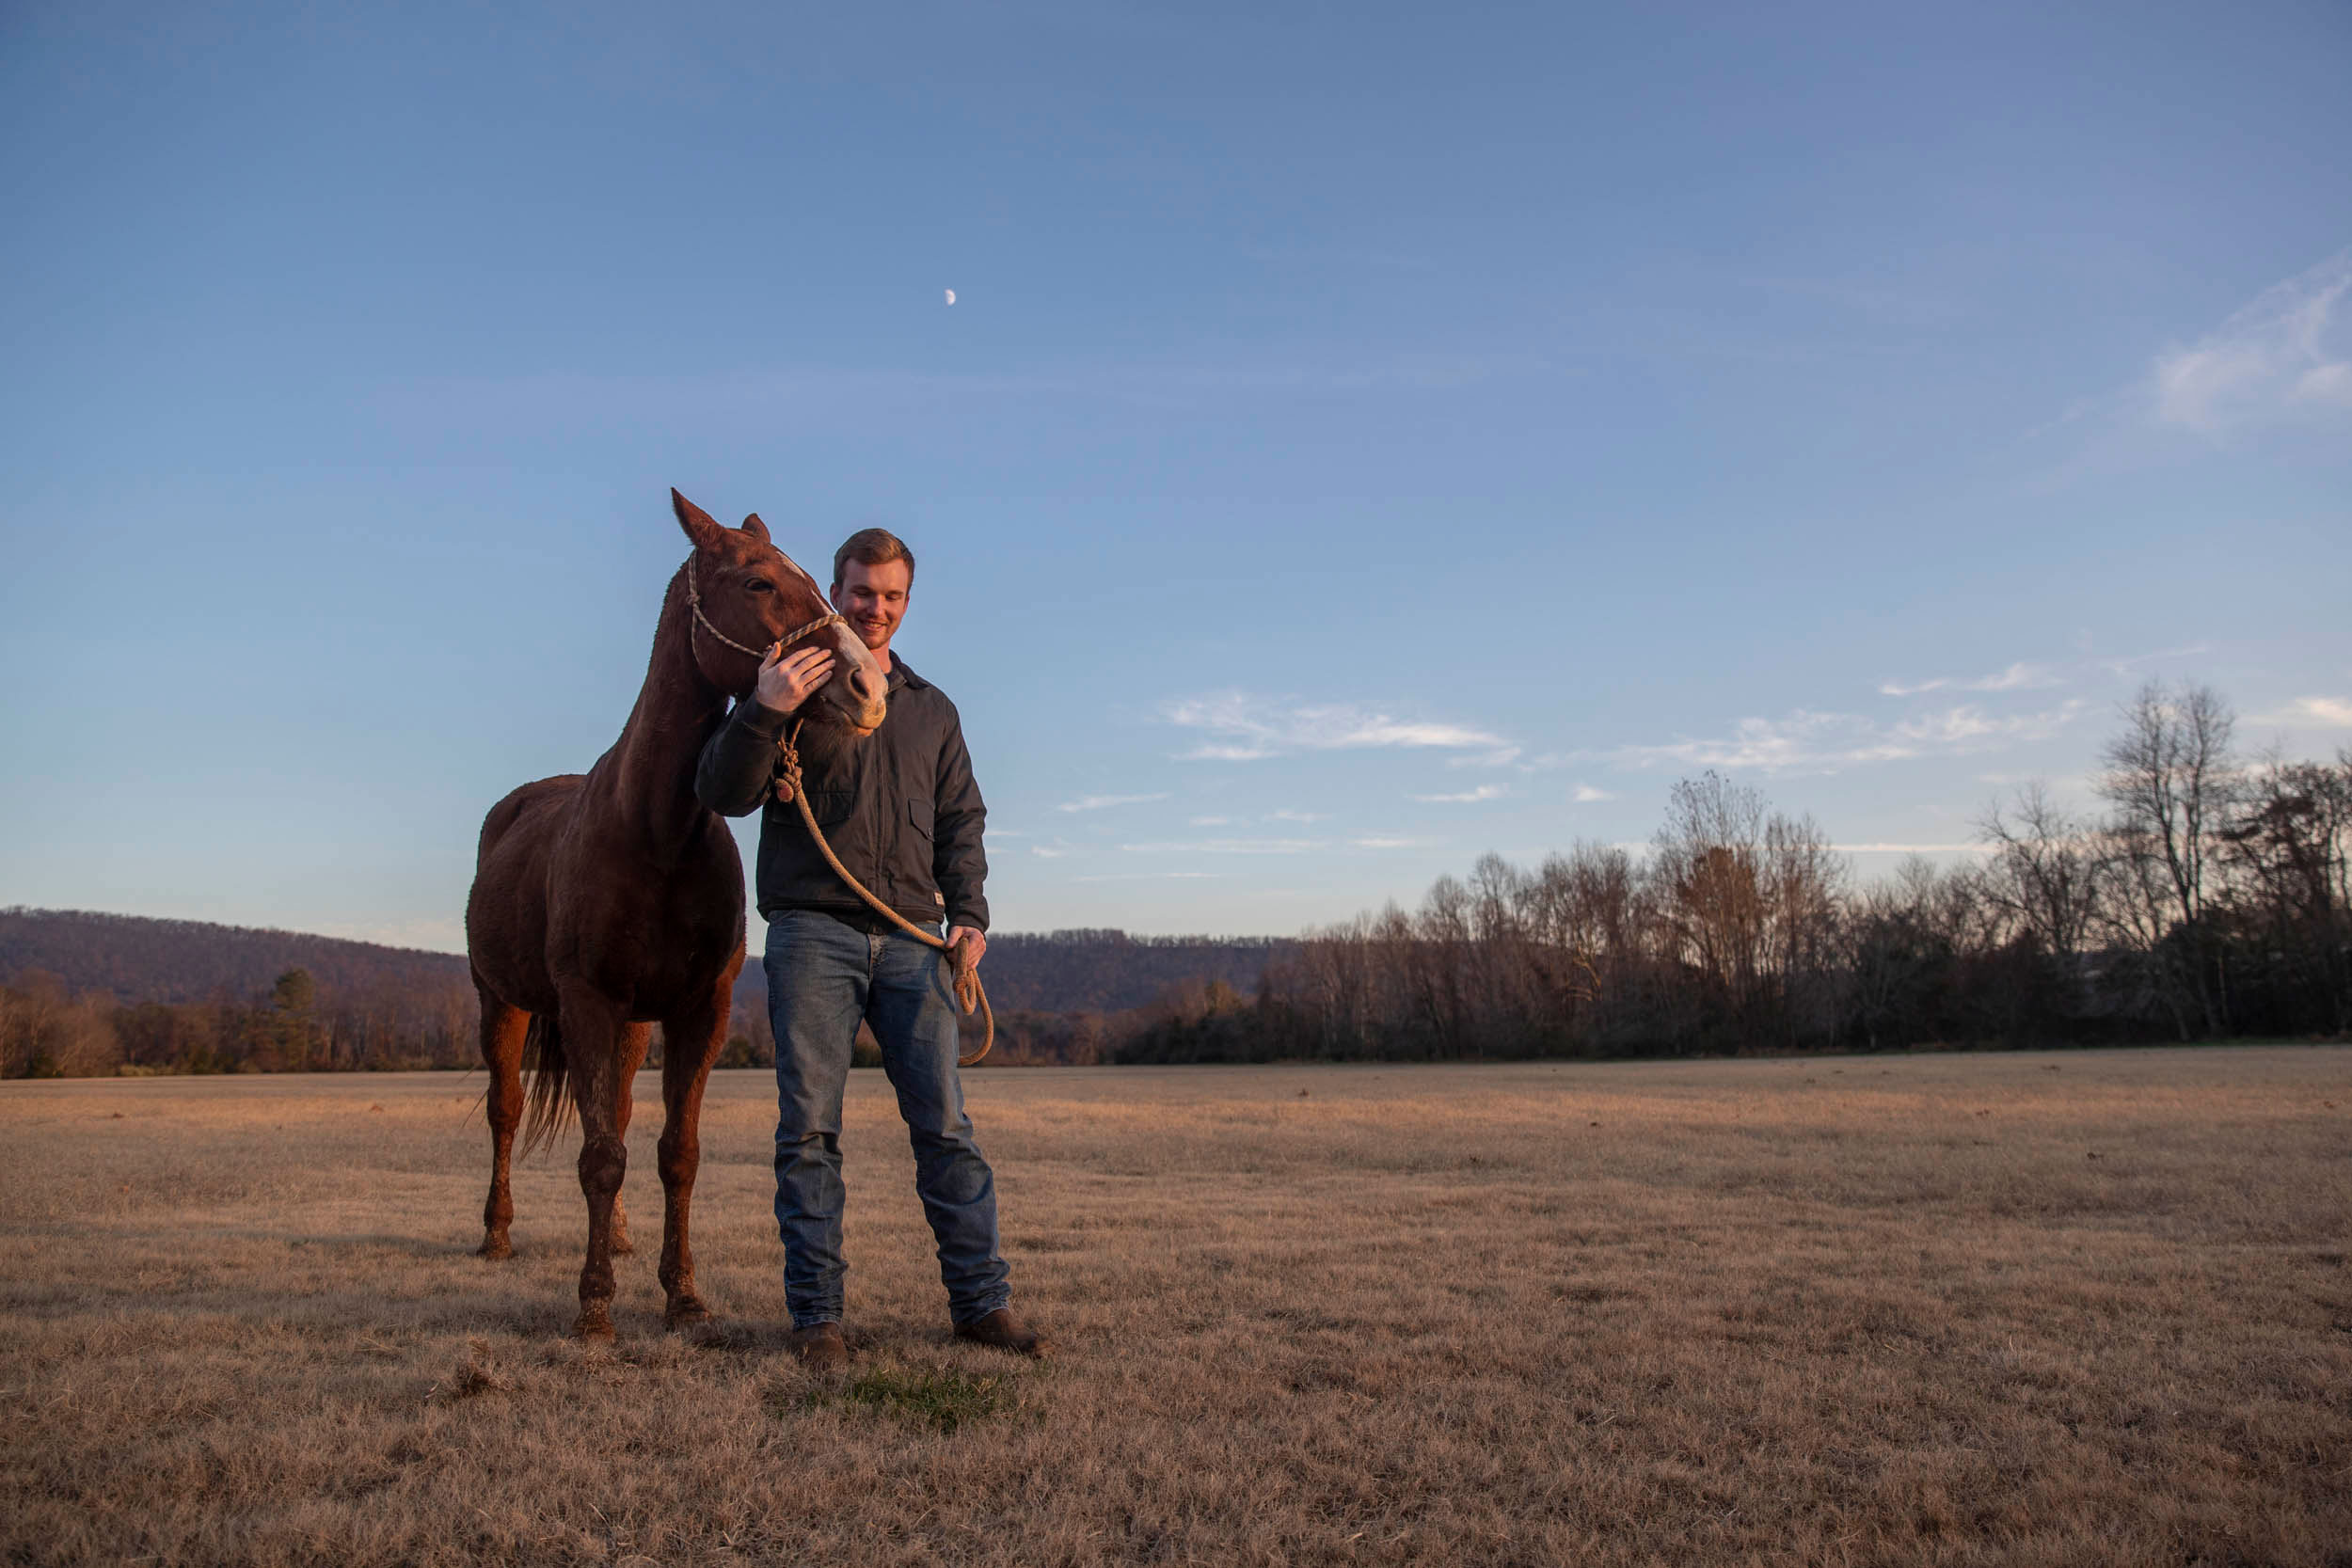 Jake Kausen standing in a field with a Horse